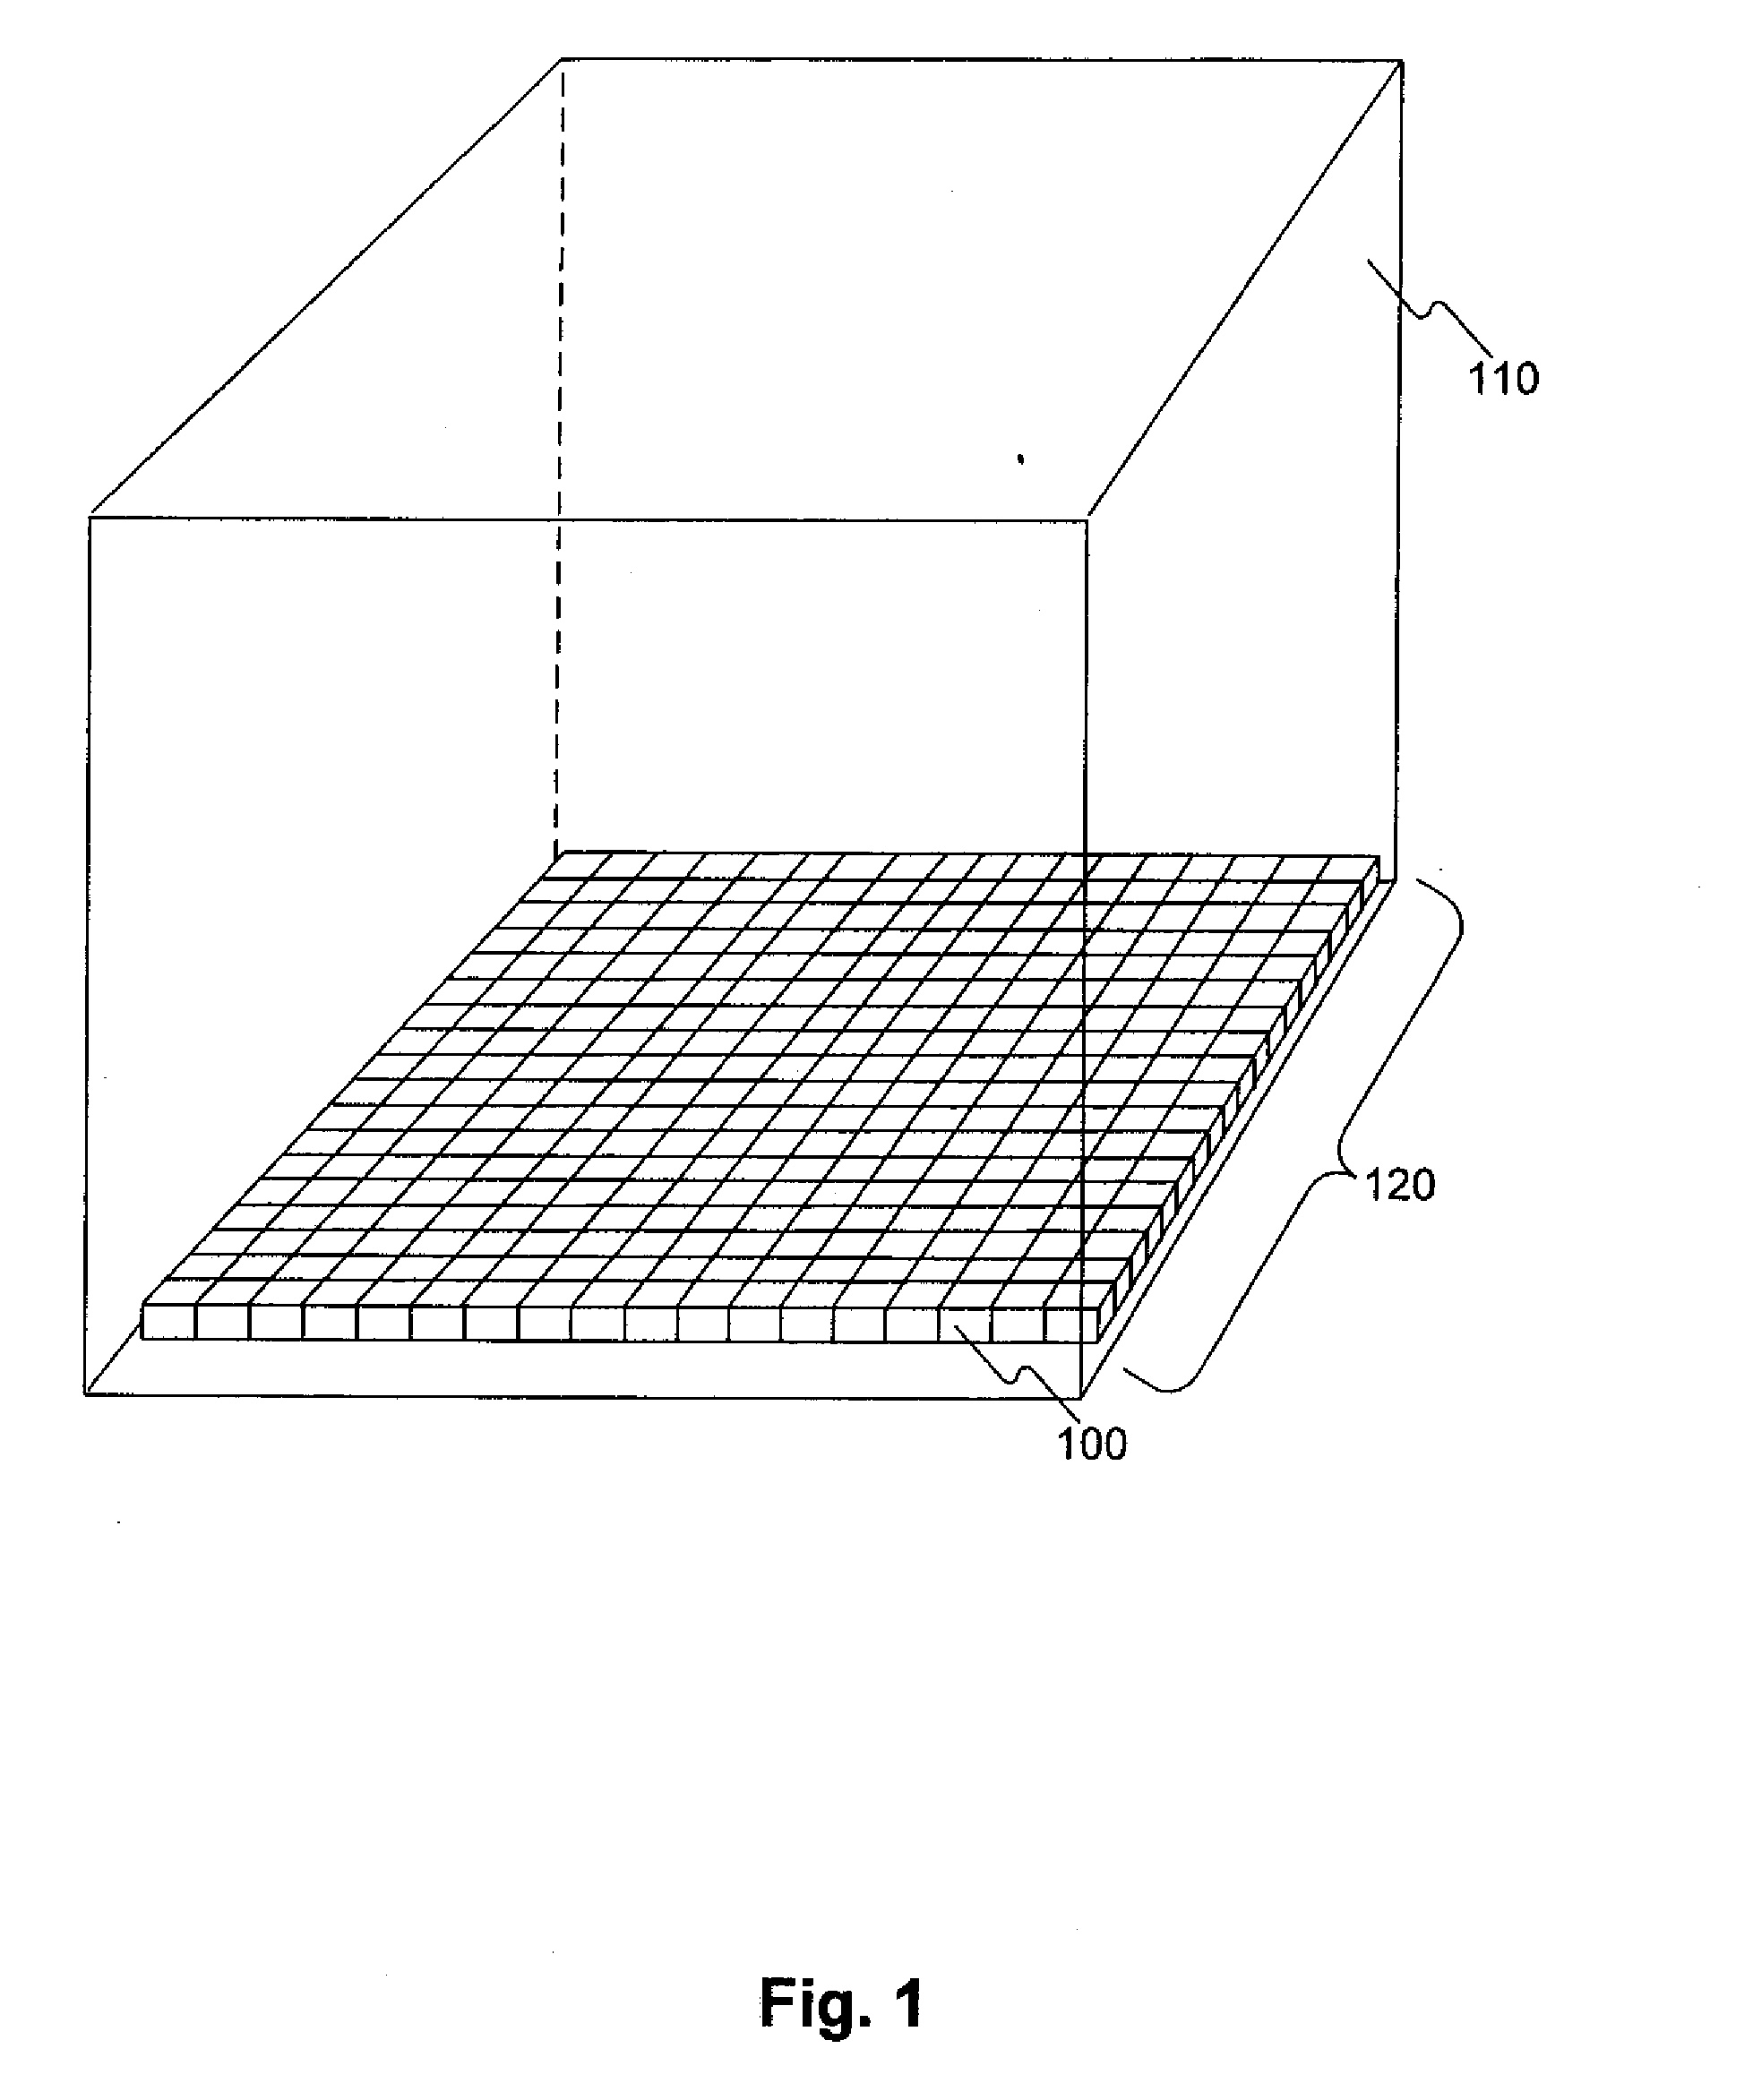 Methods and Apparatuses for Manufacturing Monocrystalline Cast Silicon and Monocrystalline Cast Silicon Bodies for Photovoltaics